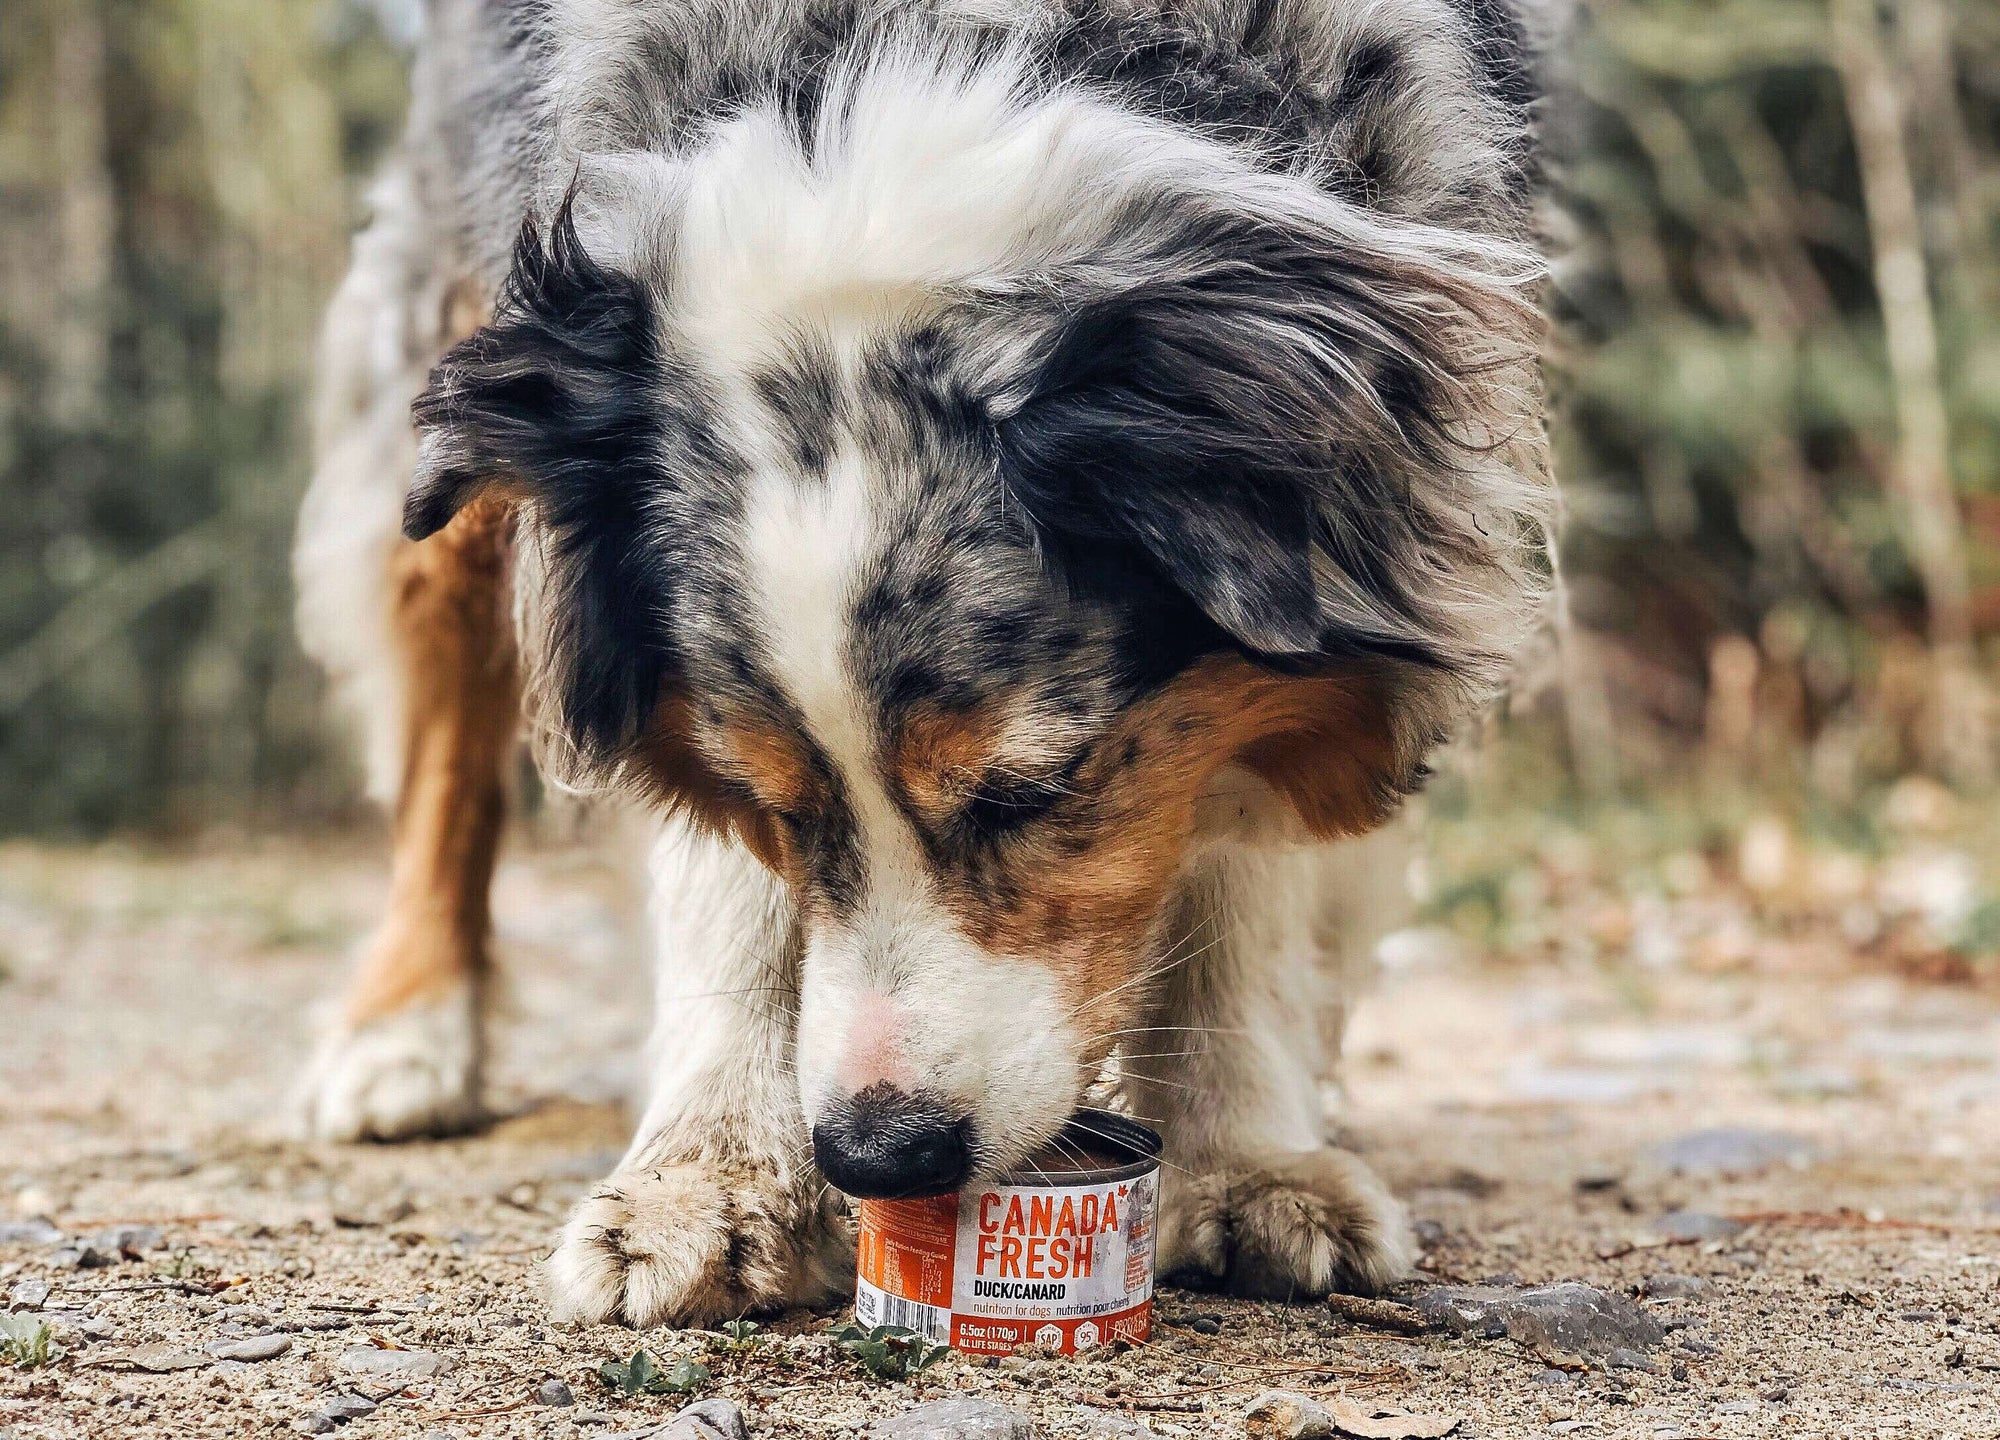 Australian Shepherd eating from a 6.5 oz can of Canada Fresh Duck Variant.